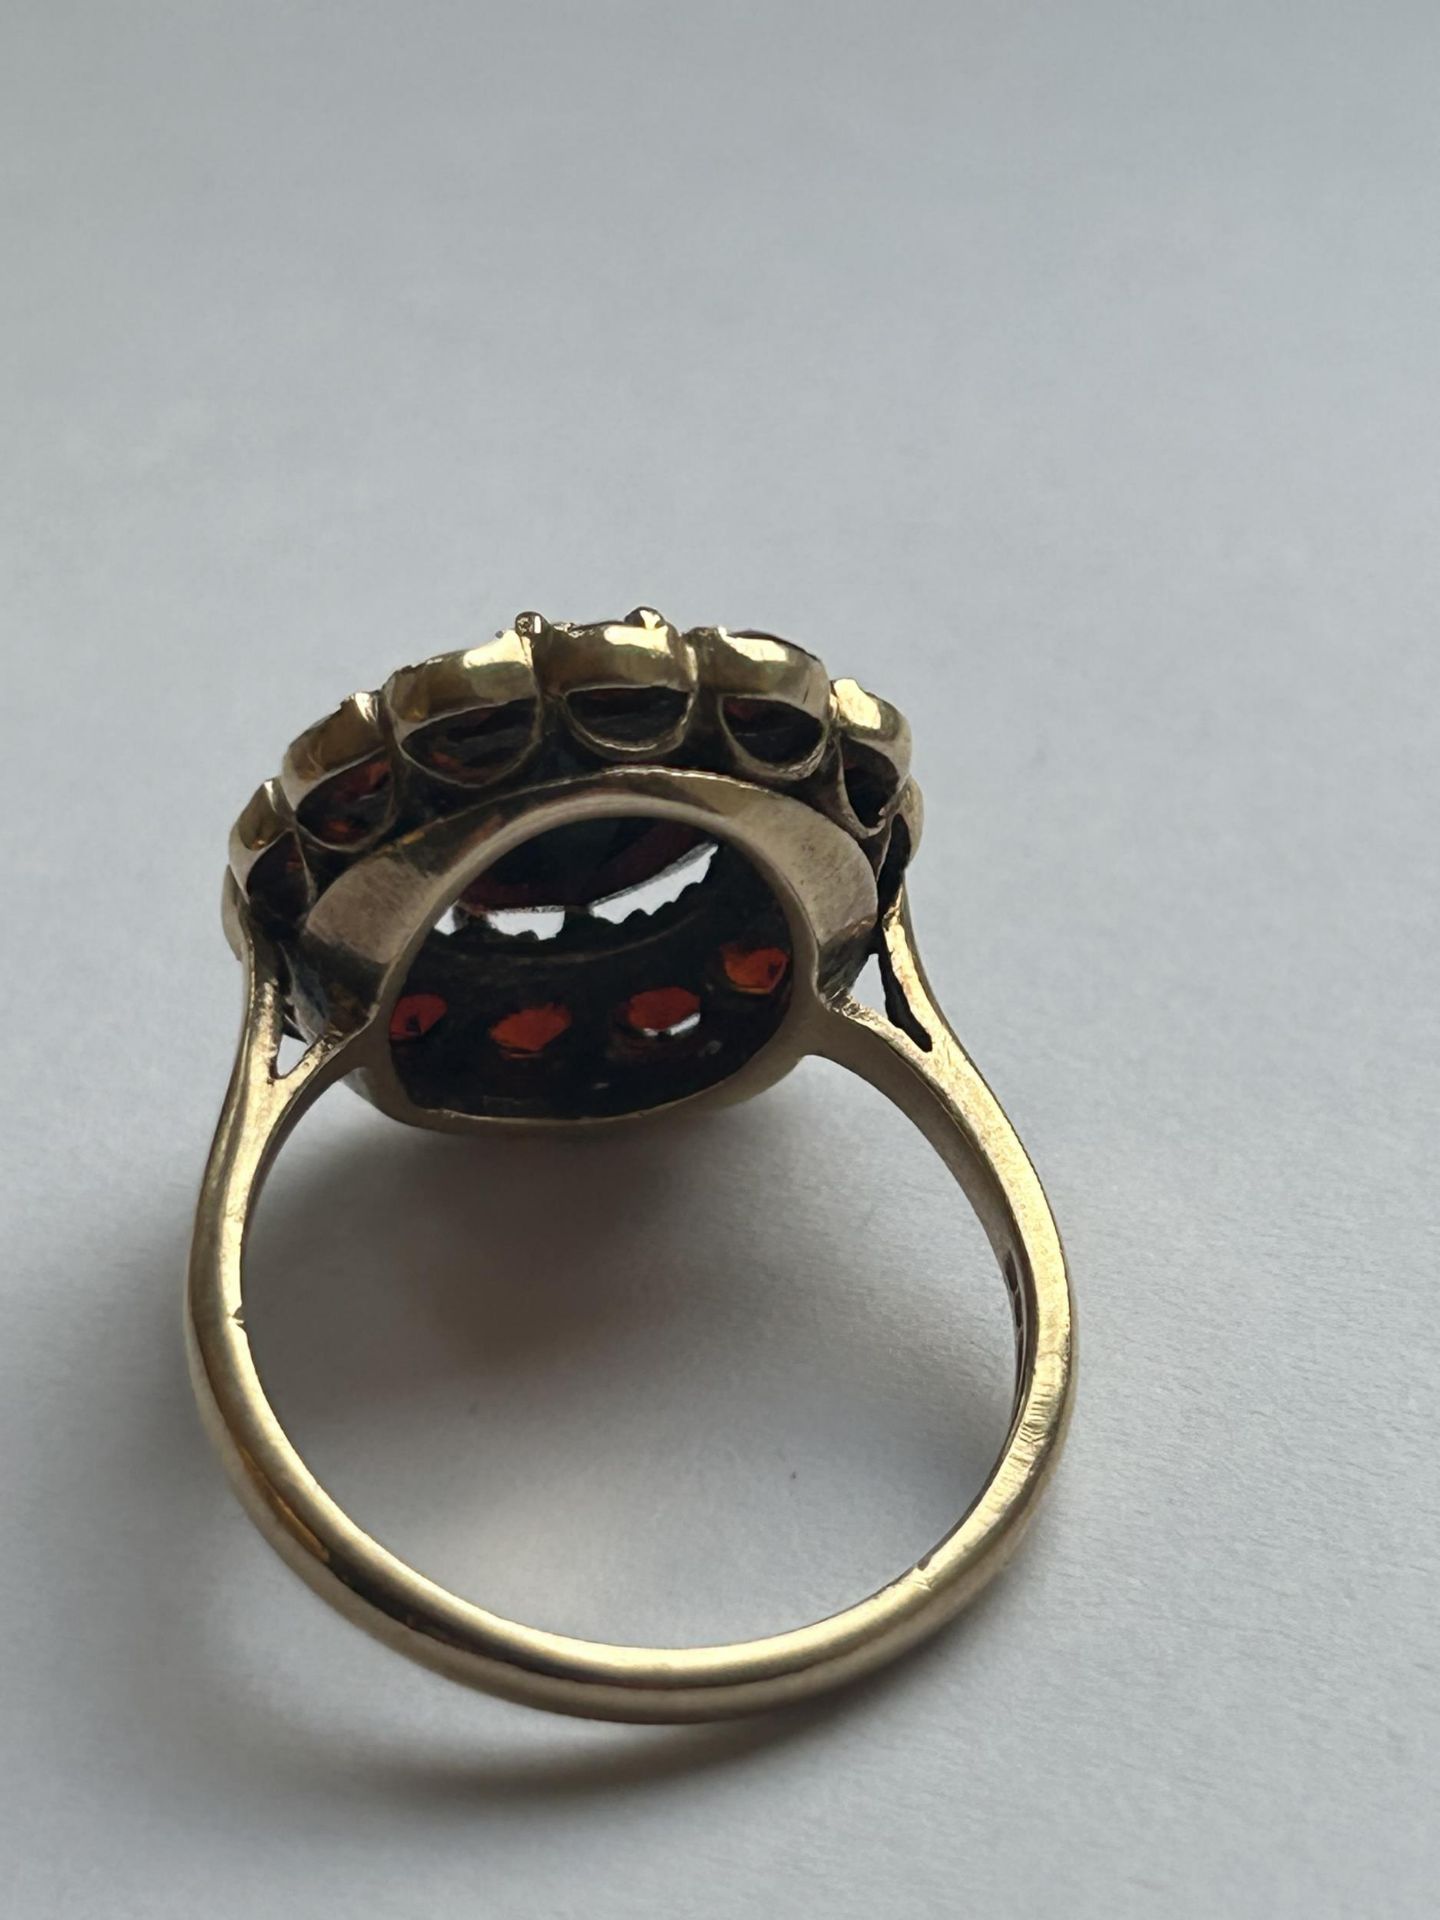 A 9CT YELLOW GOLD AND GARNET RING IN A FLOWER DESIGN SIZE P, WEIGHT 5.46 GRAMS - Image 3 of 4